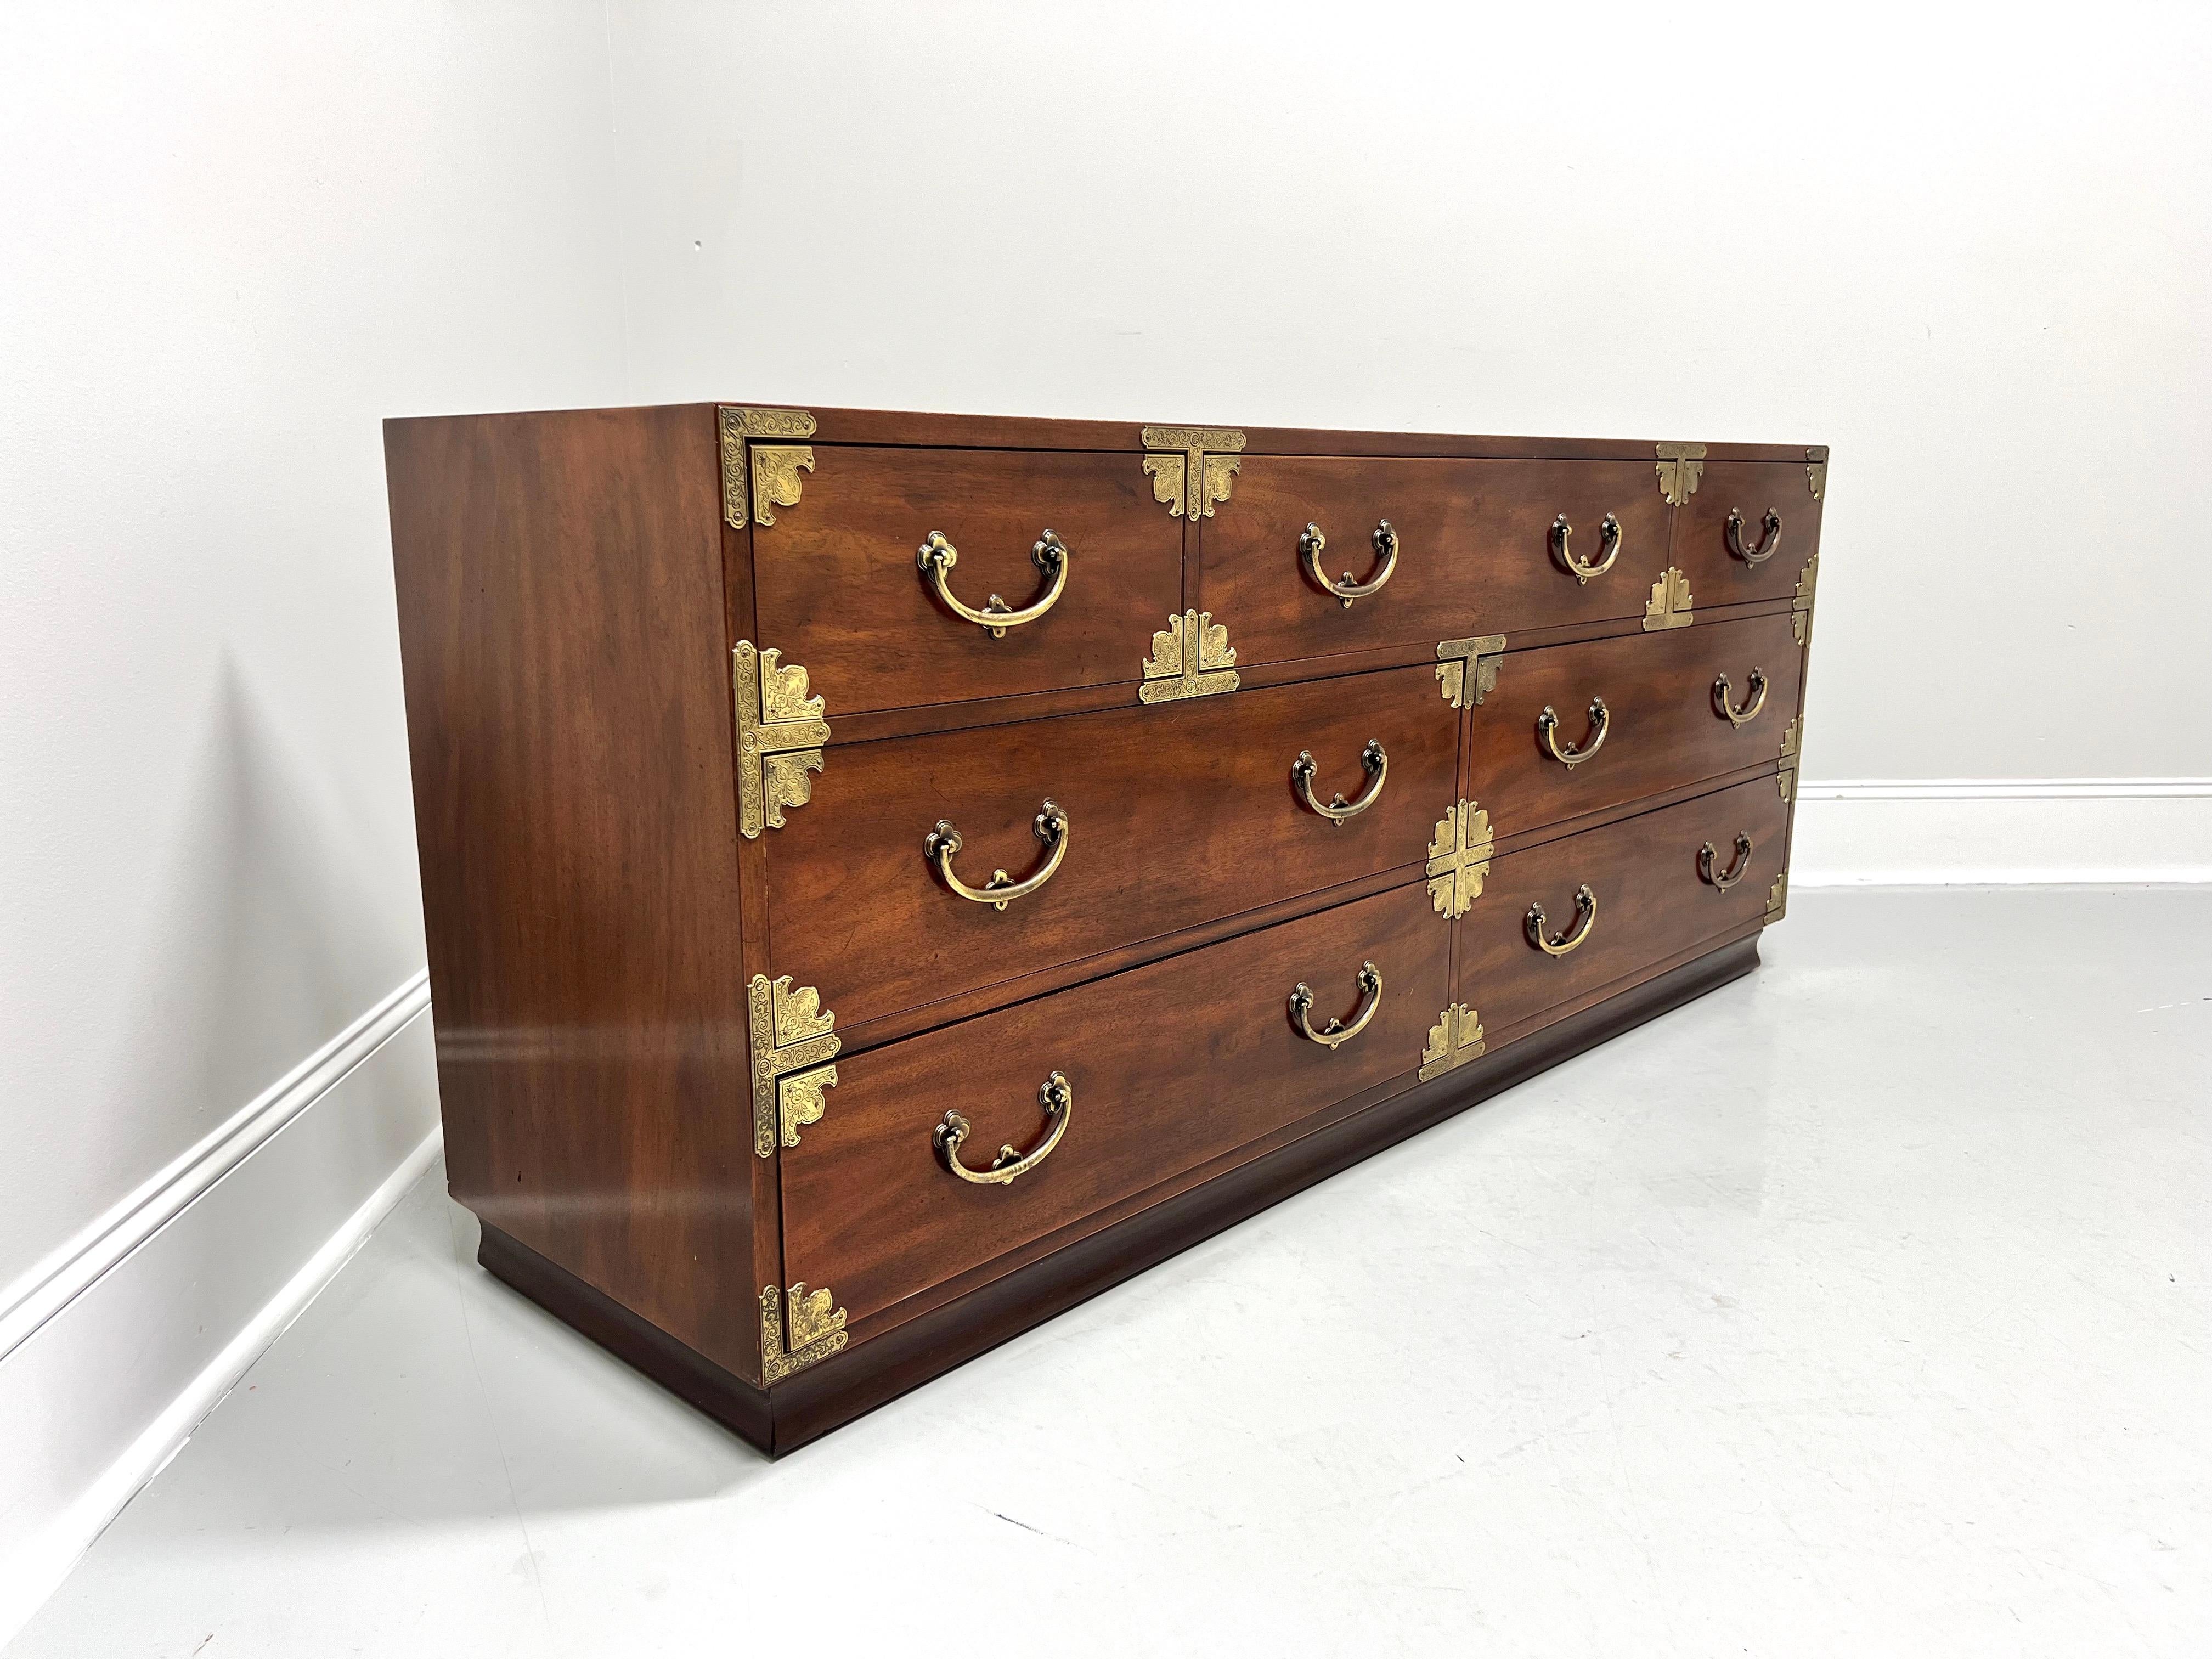 A dresser in the Japanese Tansu Campaign style by Henredon. Mahogany with smooth surface top, brass hardware & accents, and a solid base. Features seven various size dovetail drawers, top center has removable dividers and a jewelry tray with lower